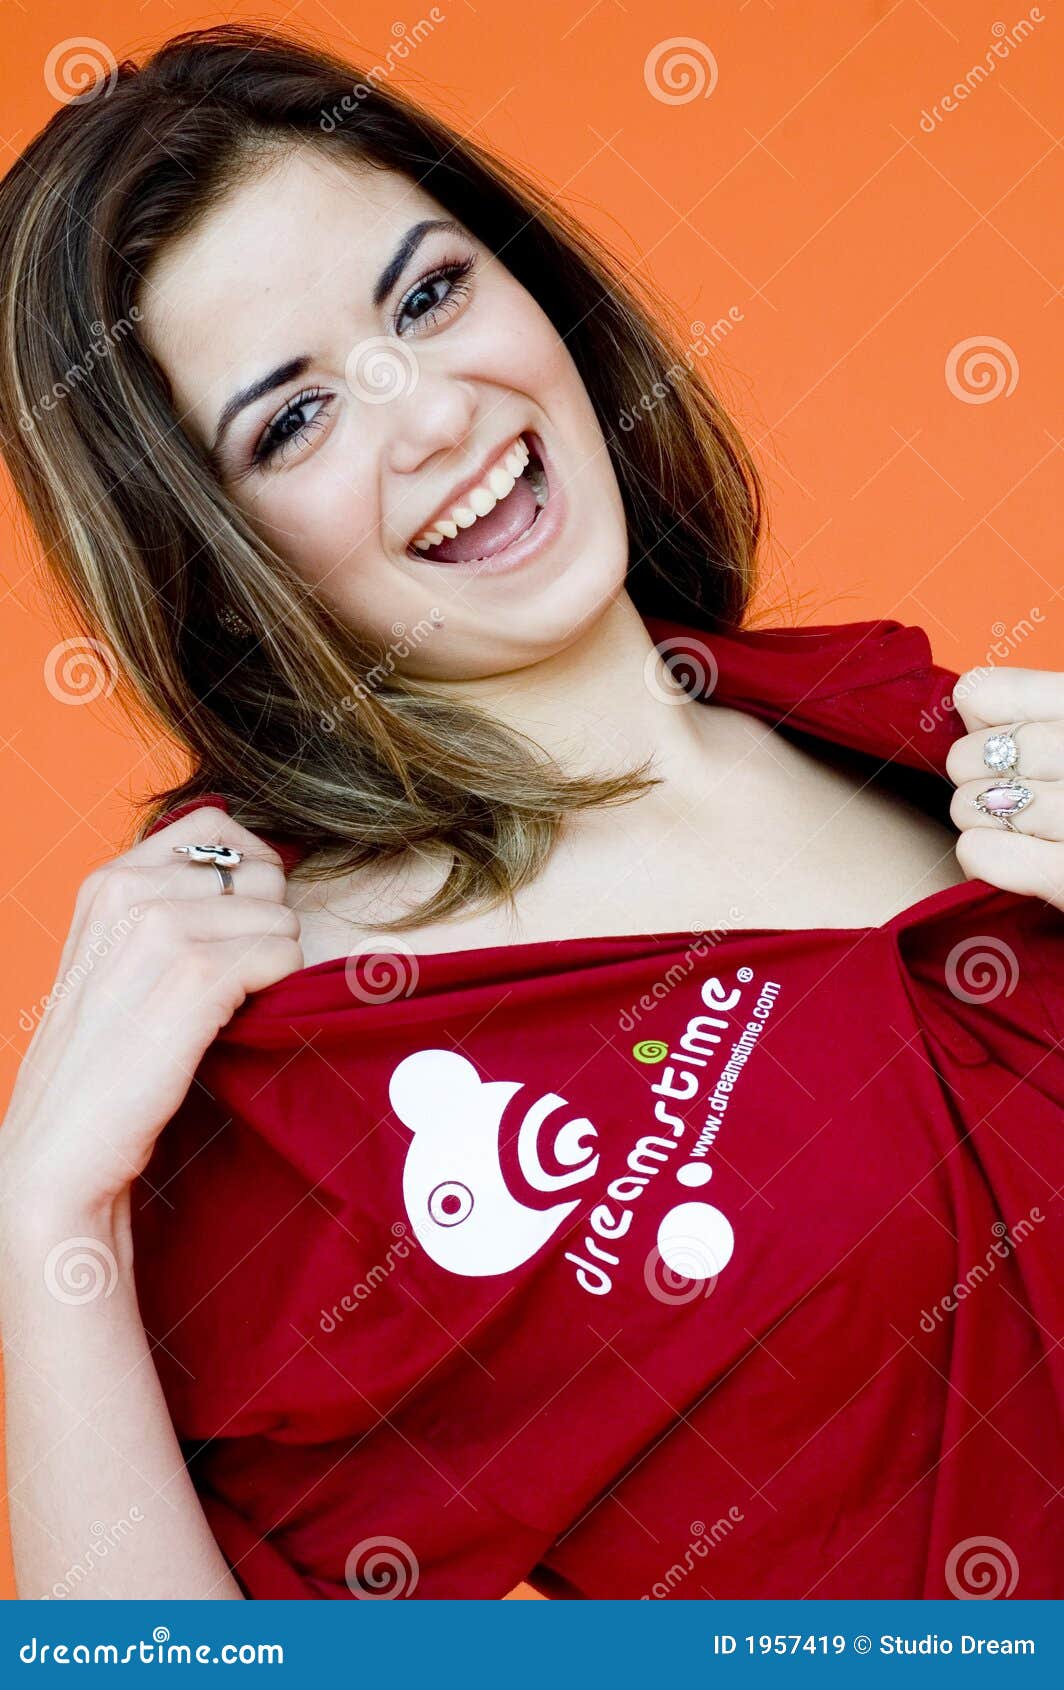 Girl In Dreamstime Shirt Royalty Free Stock Images - Image: 1957419